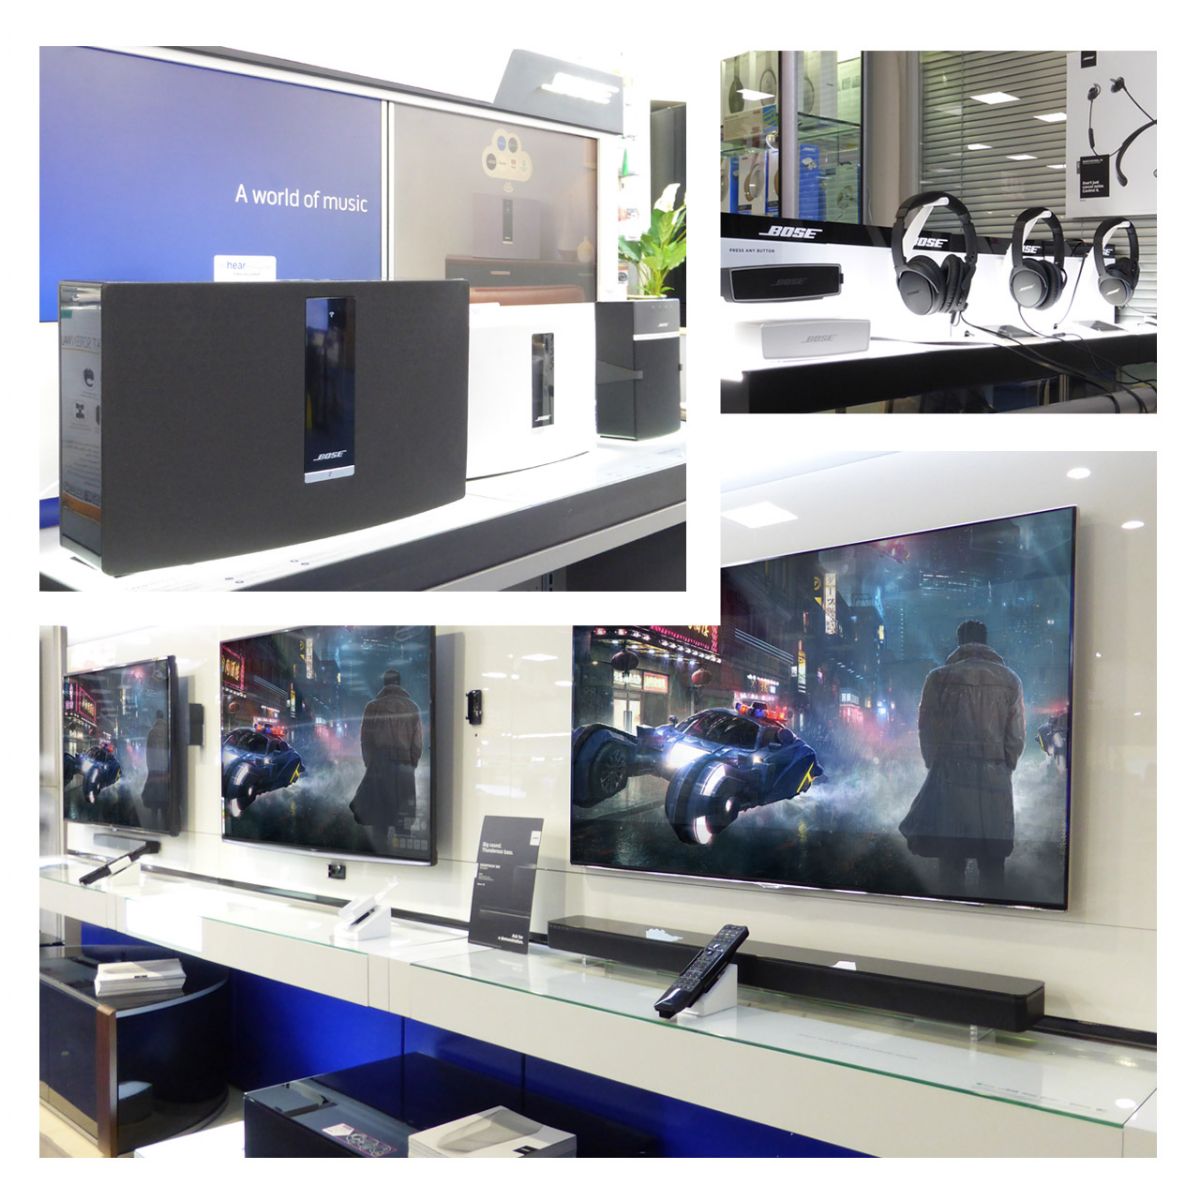 Bose Products | Bradford, West Yorkshire | Buy a Bose Product from Sonic Direct